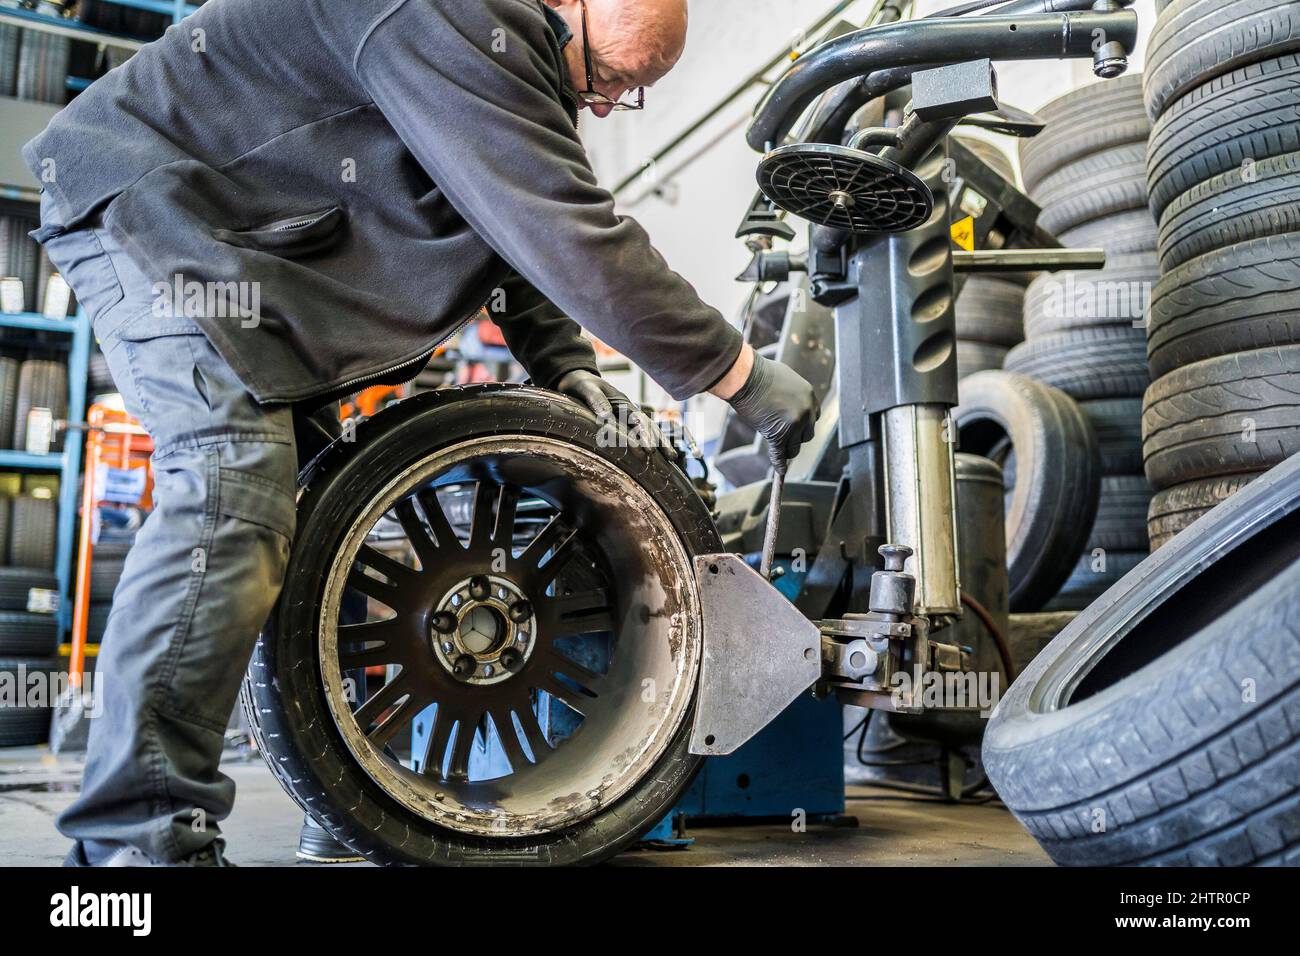 UK tyre garage workshop. Garage mechanic removing a car tyre on an alloy wheel using a vehicle tyre changing machine. Stock Photo